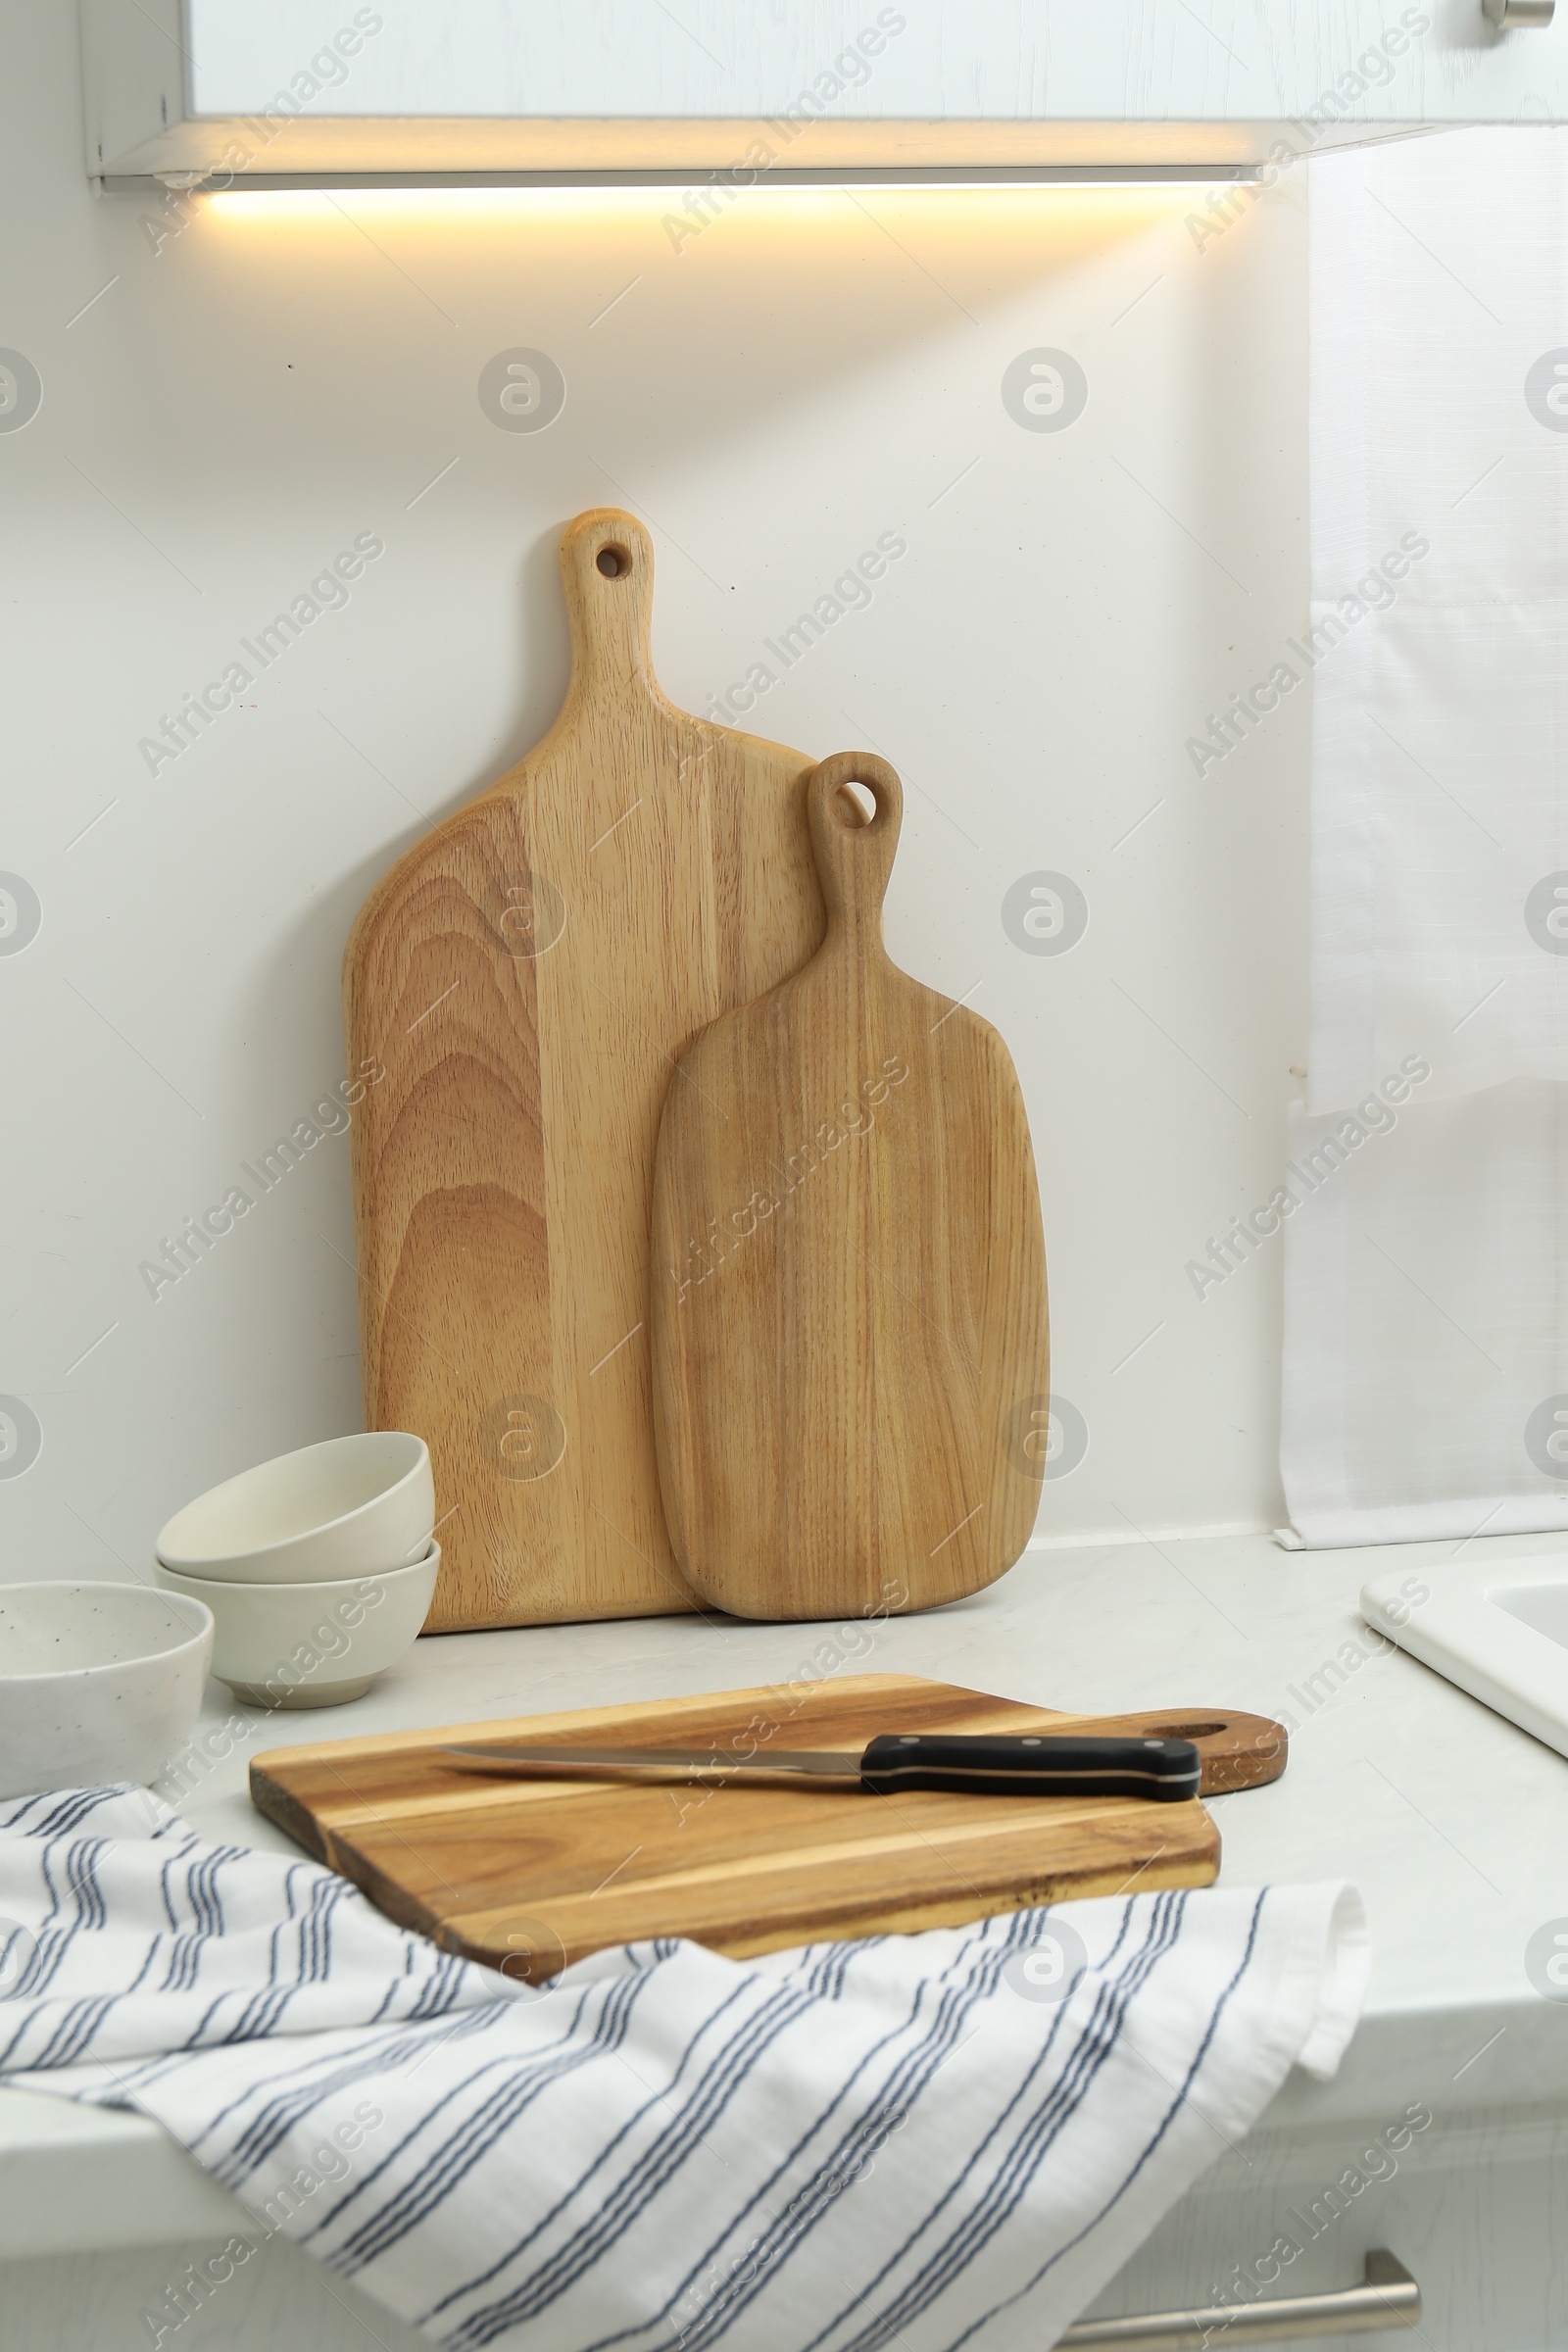 Photo of Wooden cutting boards, bowls, knife and towel on white countertop in kitchen